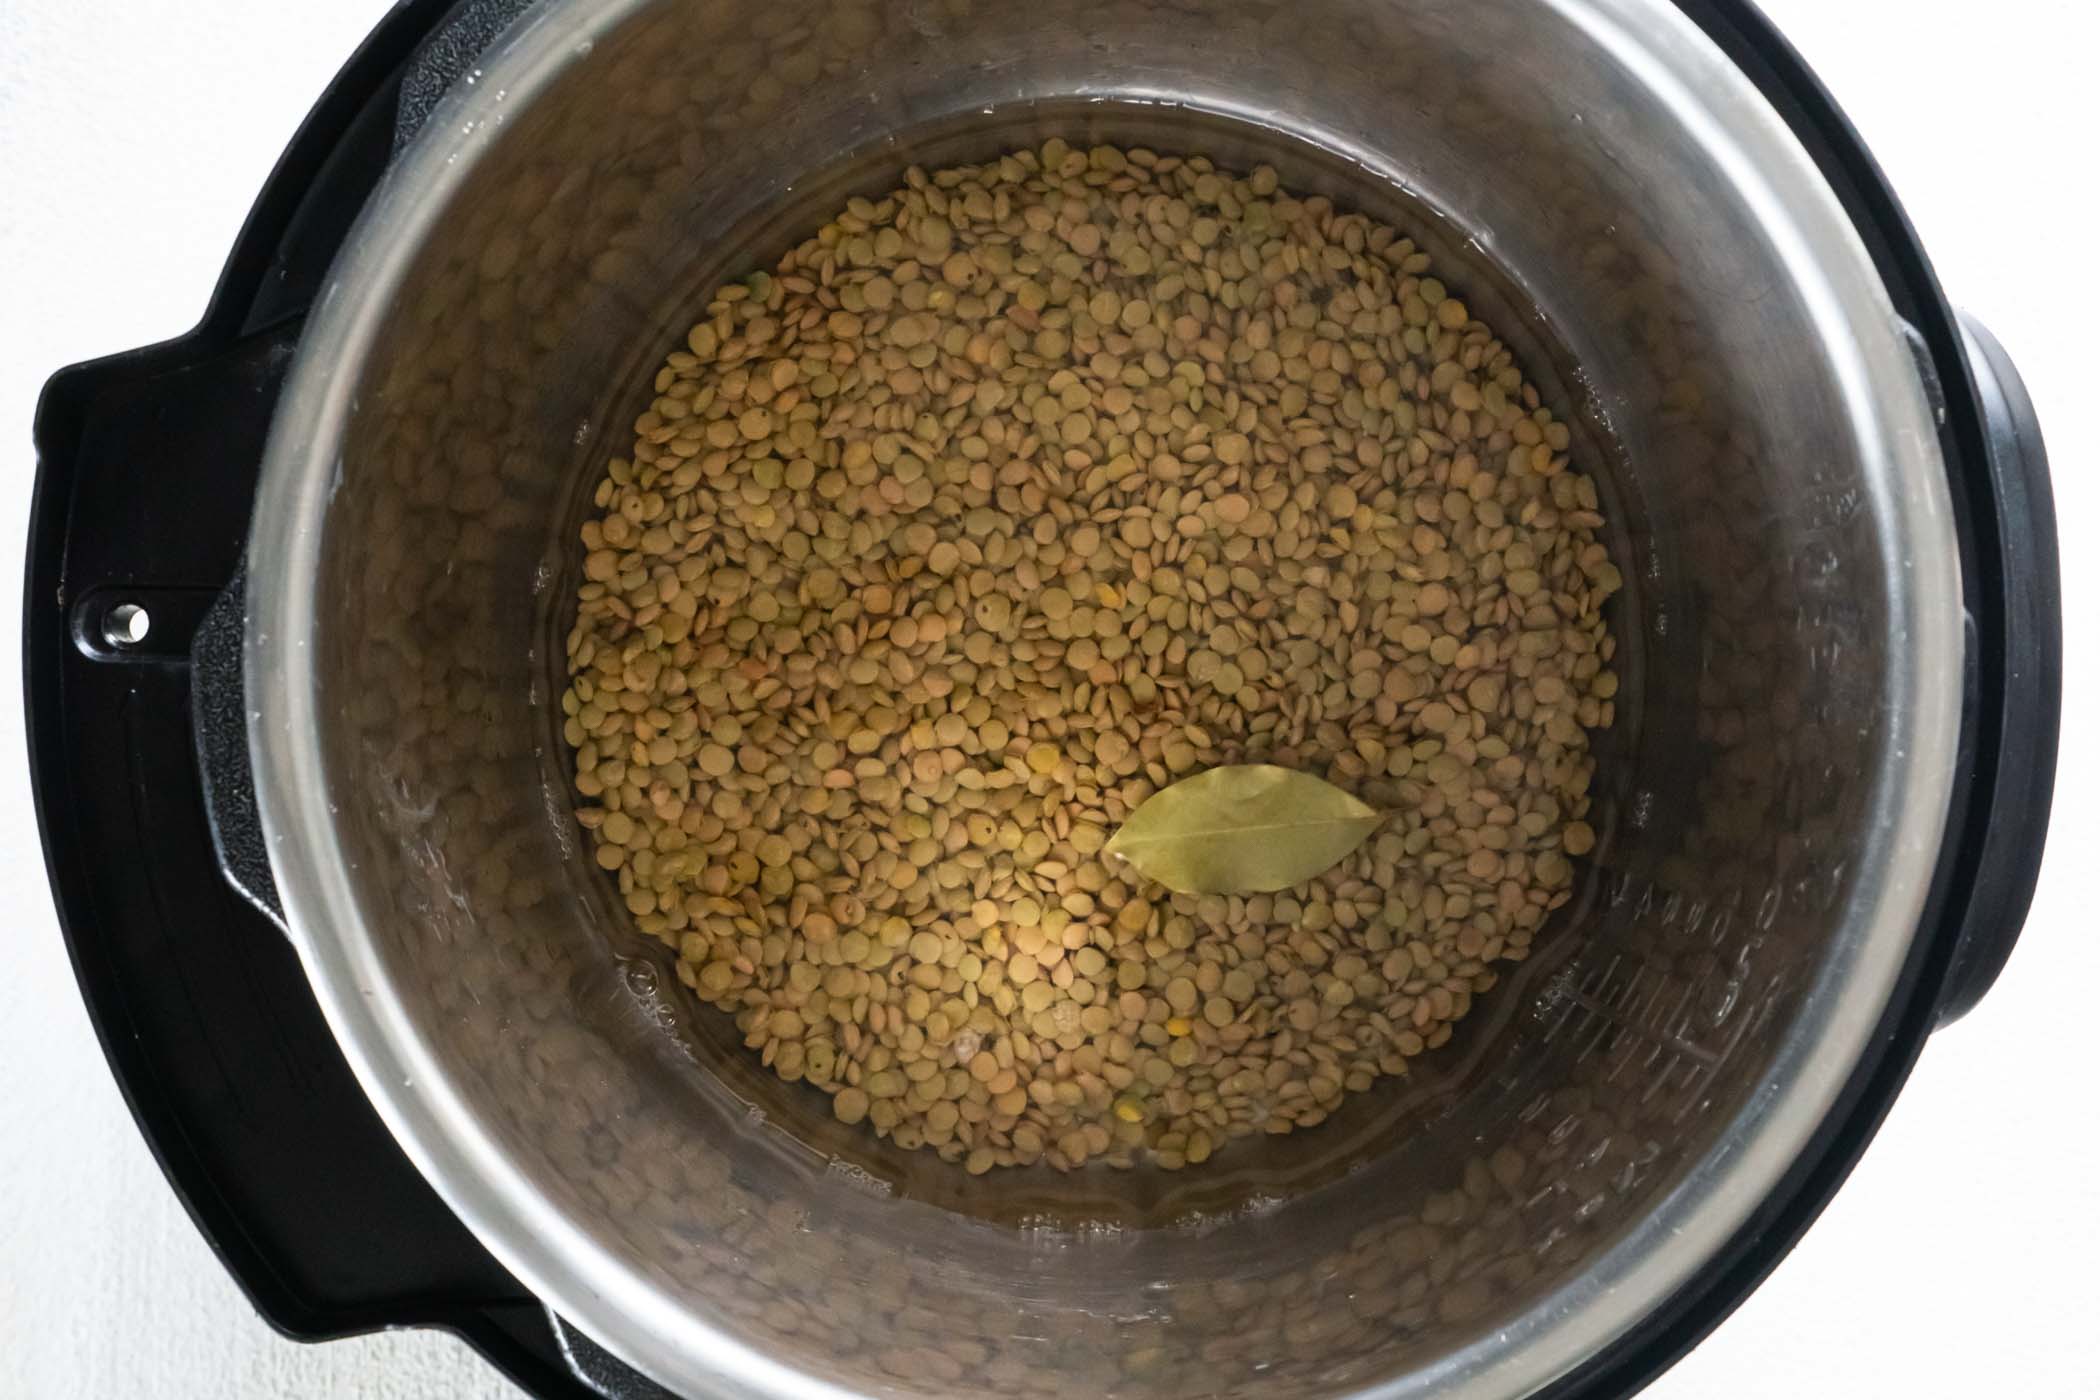 Uncooked lentils, water and seasonings in instant pot.